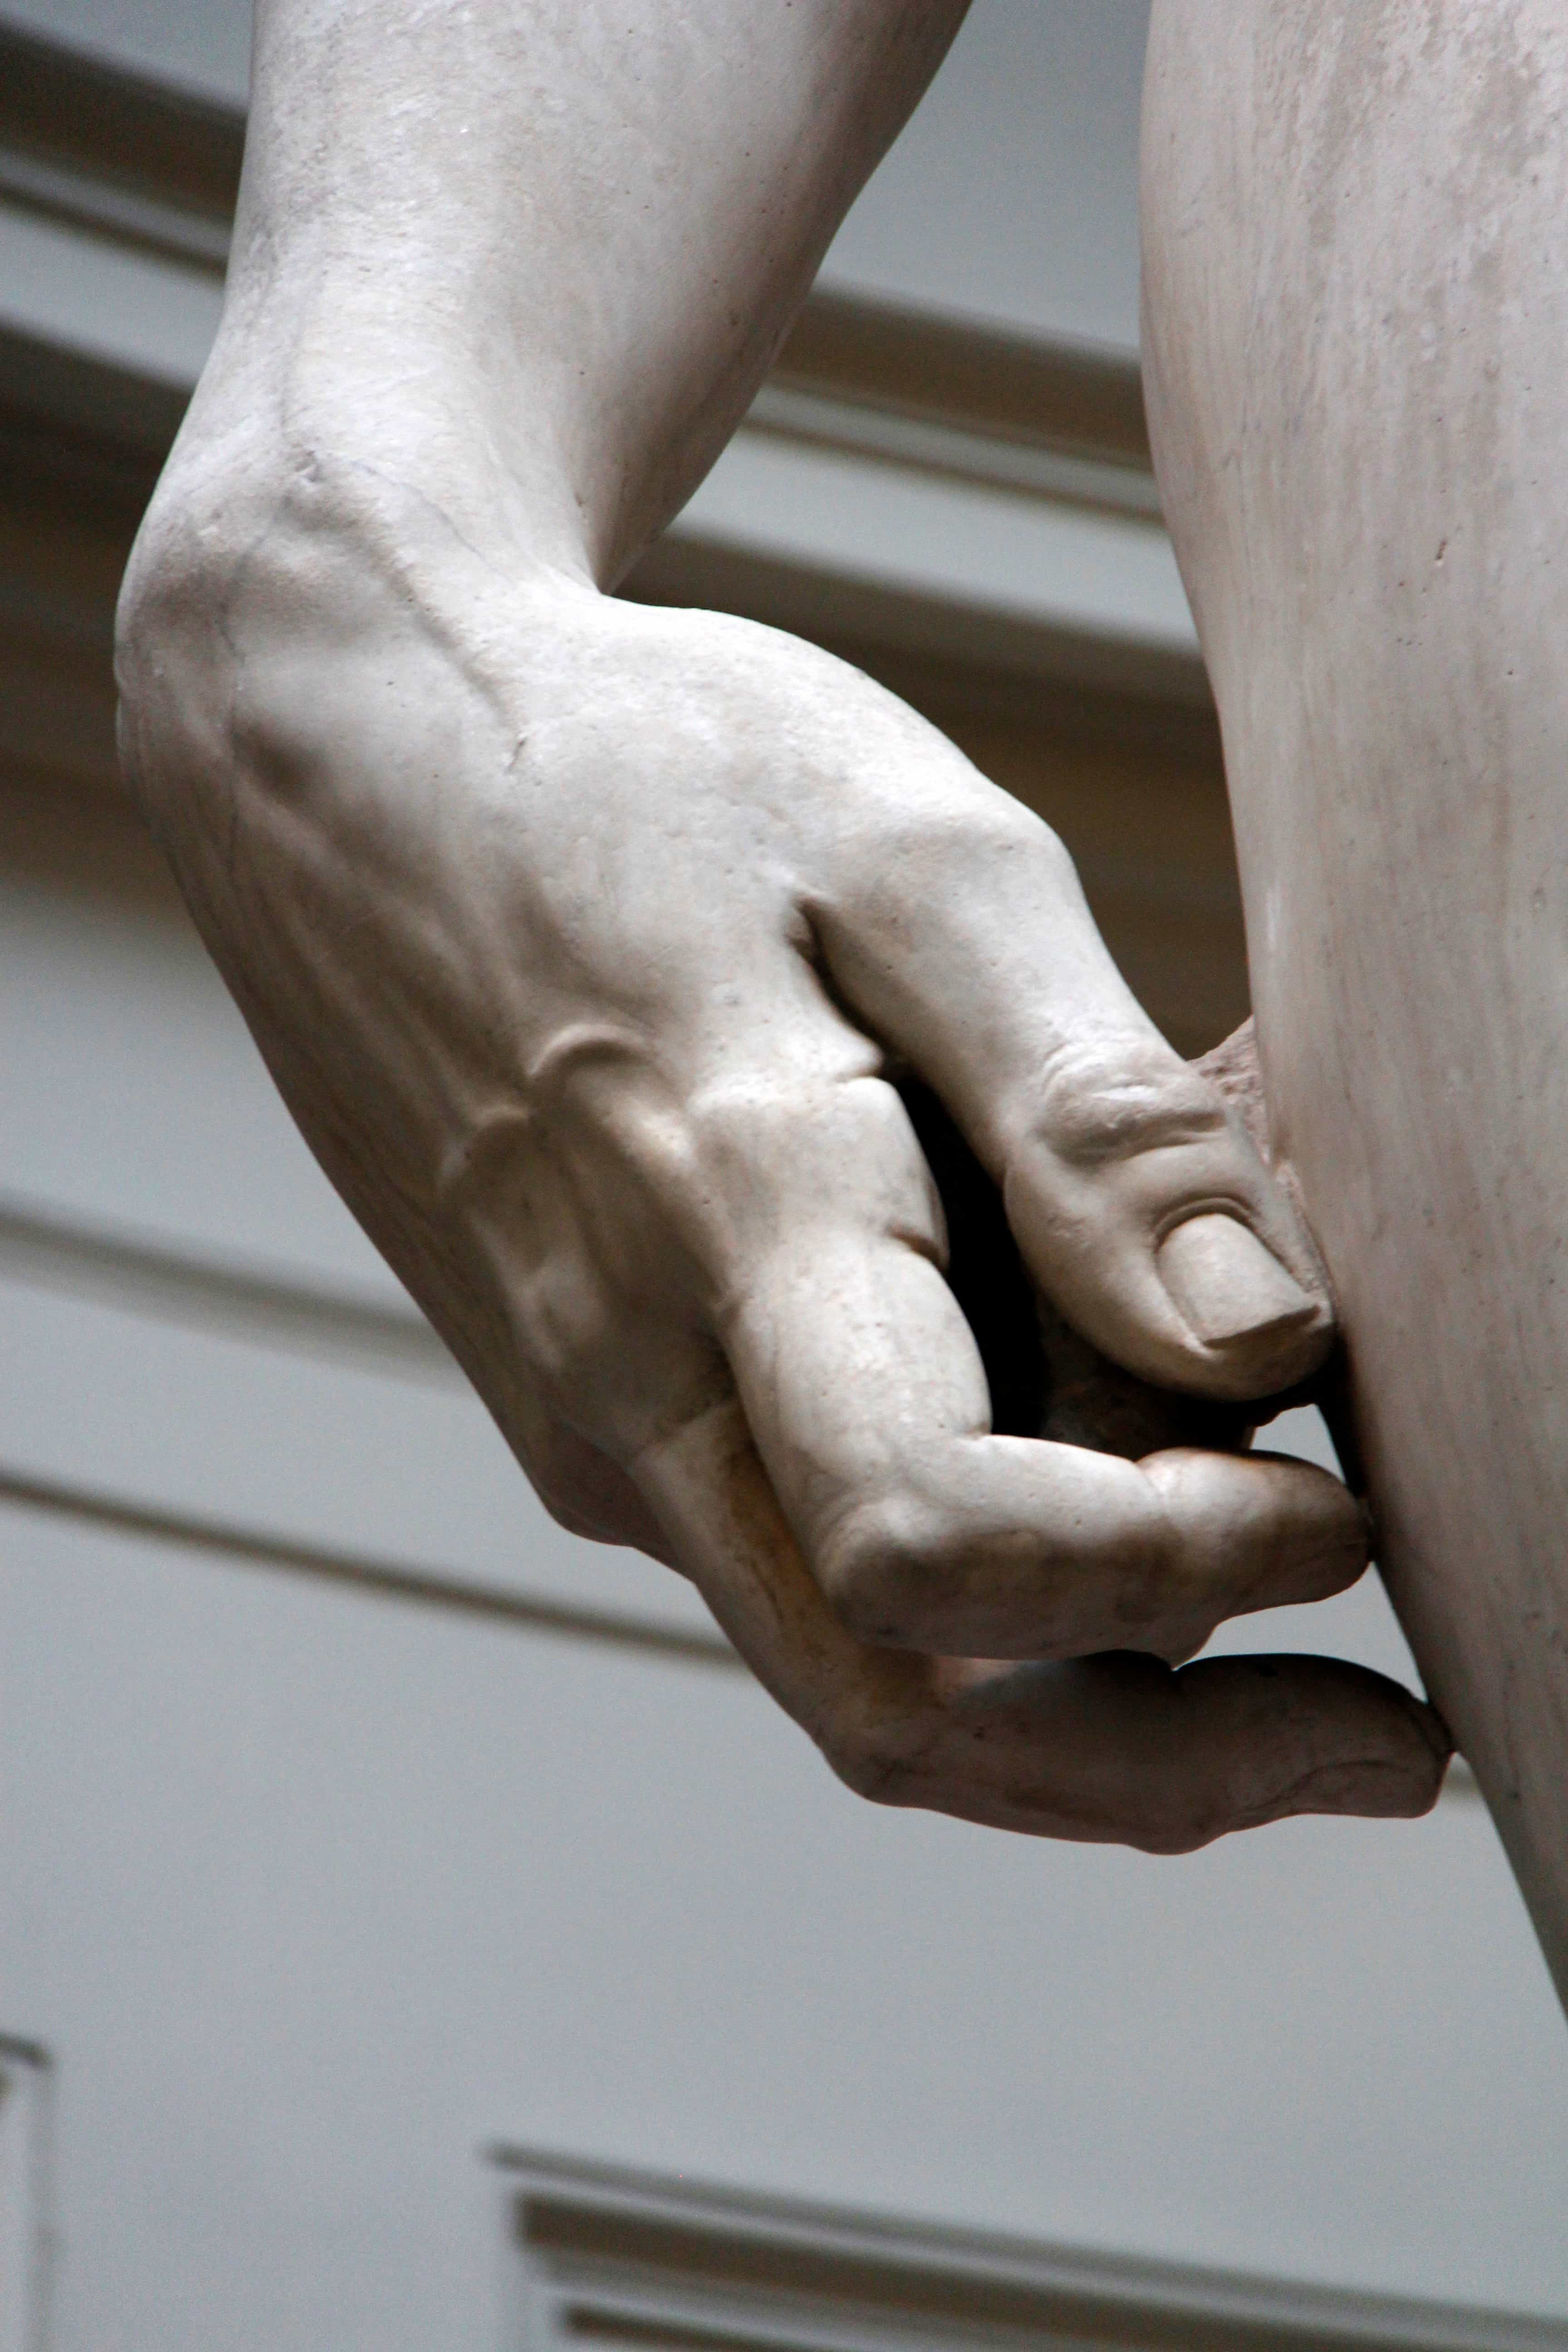 Free picture: tone, sculpture, people, man, statue, person, hand, marble